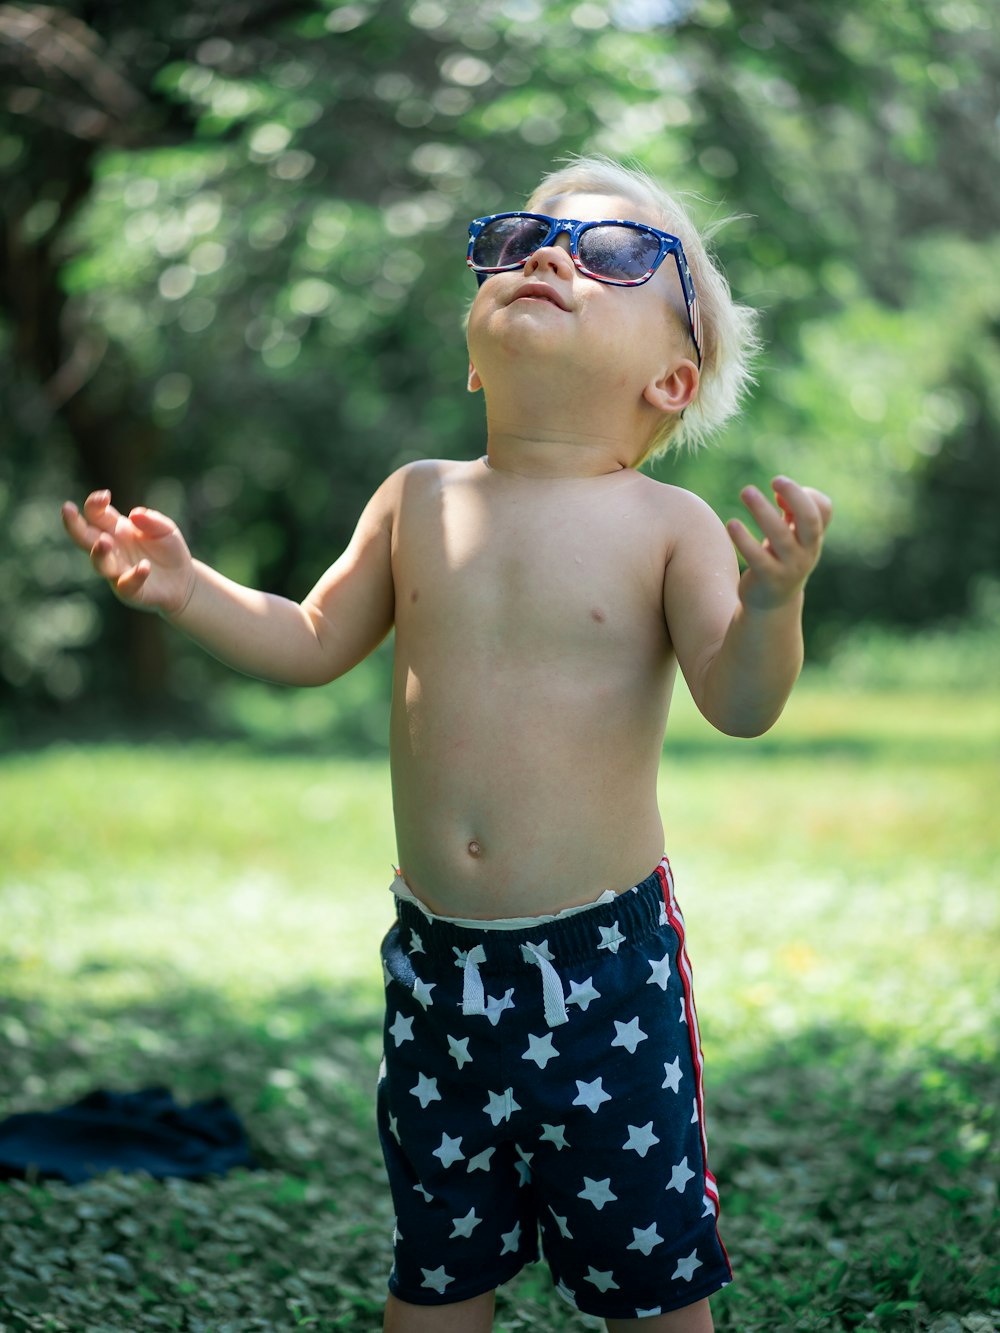 topless boy wearing blue and white floral shorts and black sunglasses